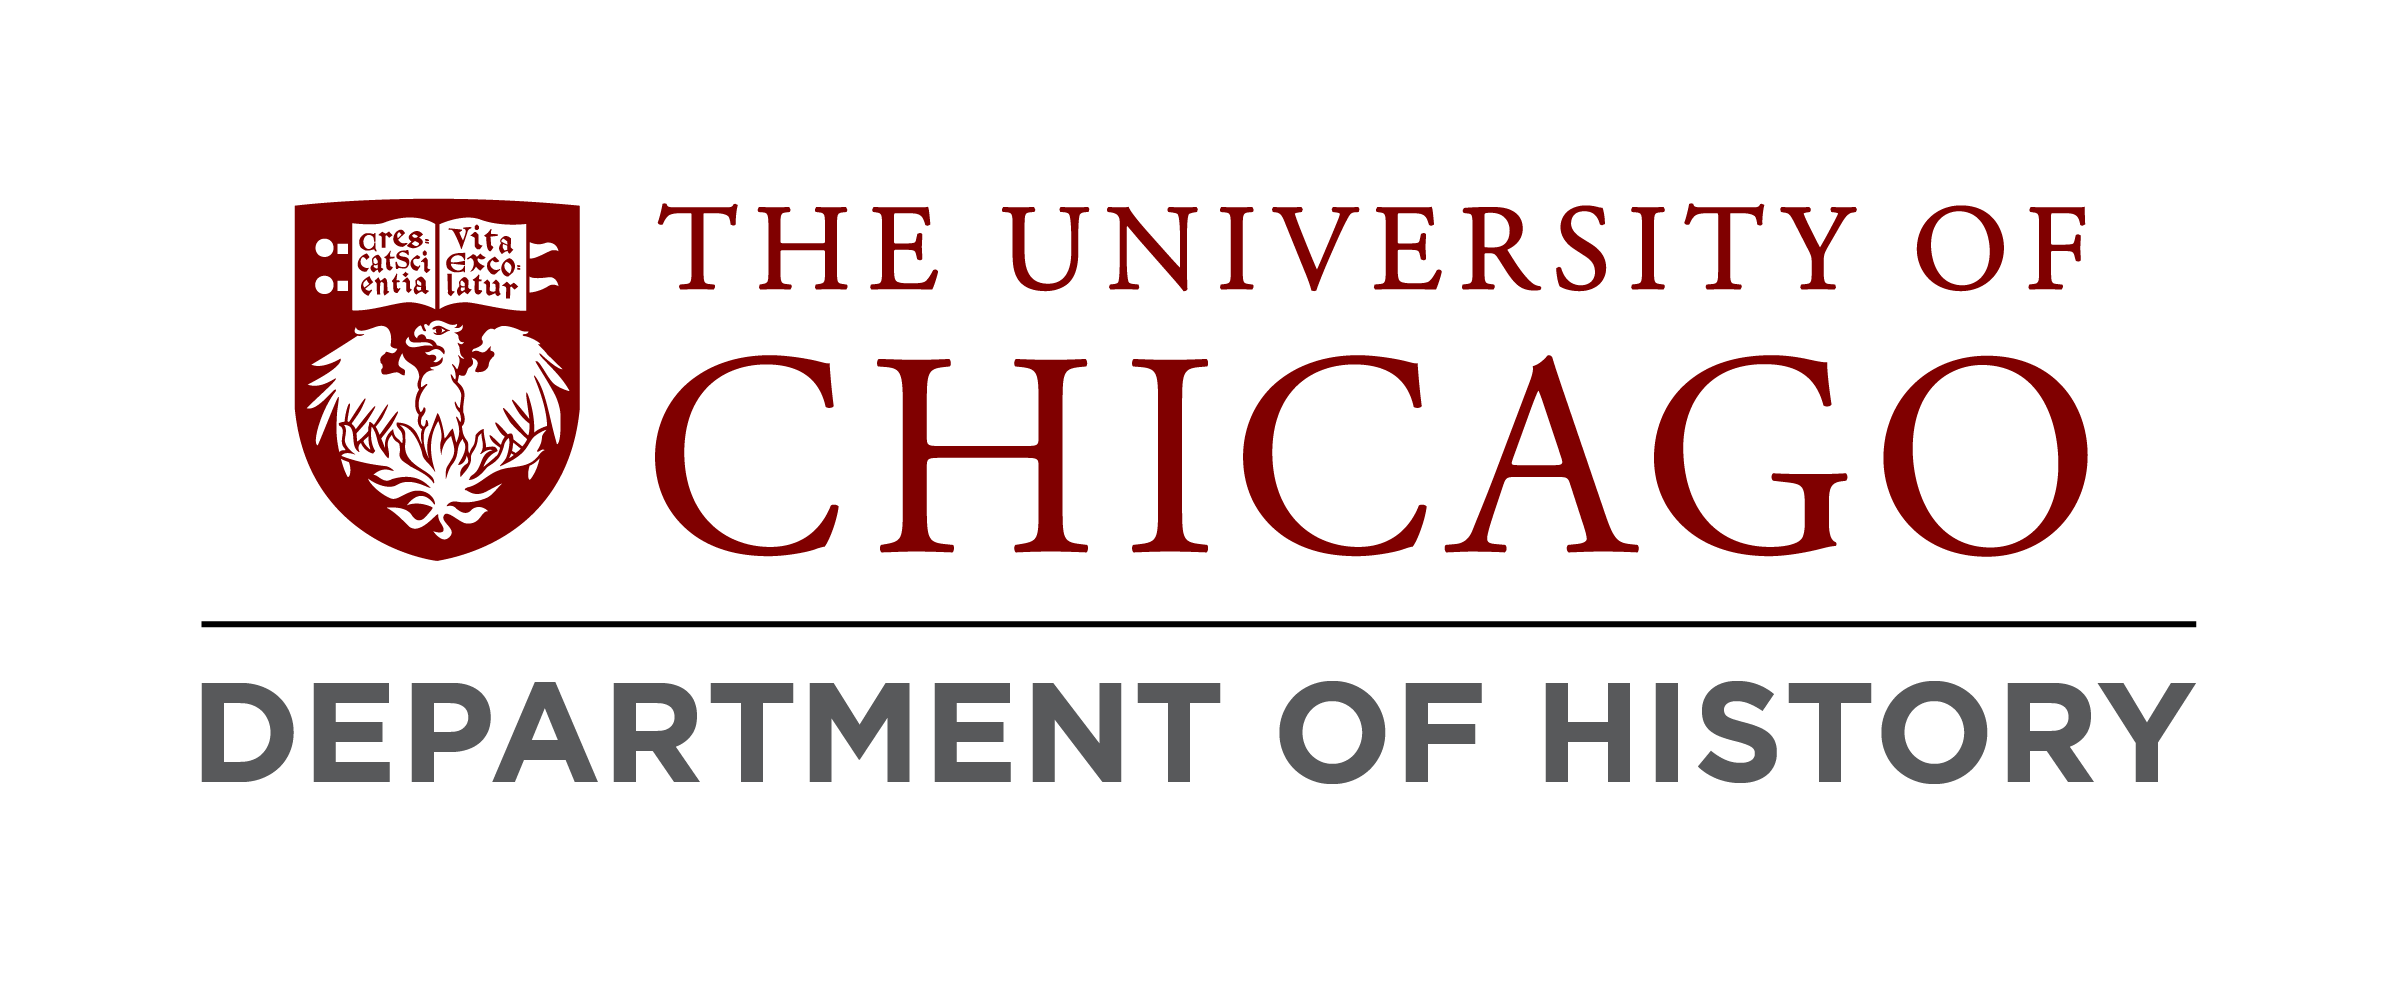 UC Department of History Logo